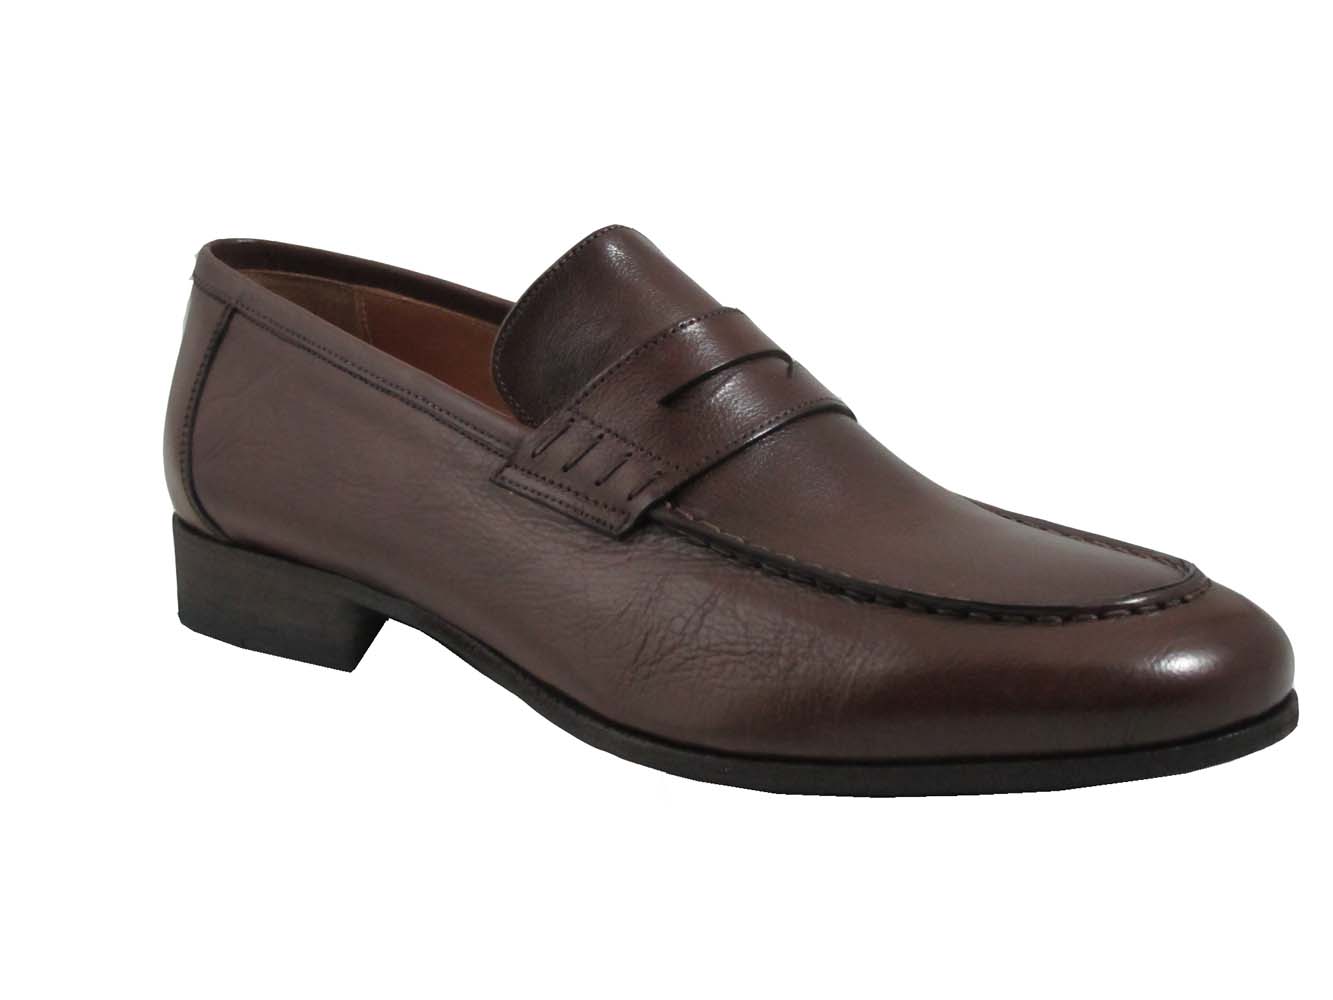 rossi-1876-loafers-shoes-brown.jpg